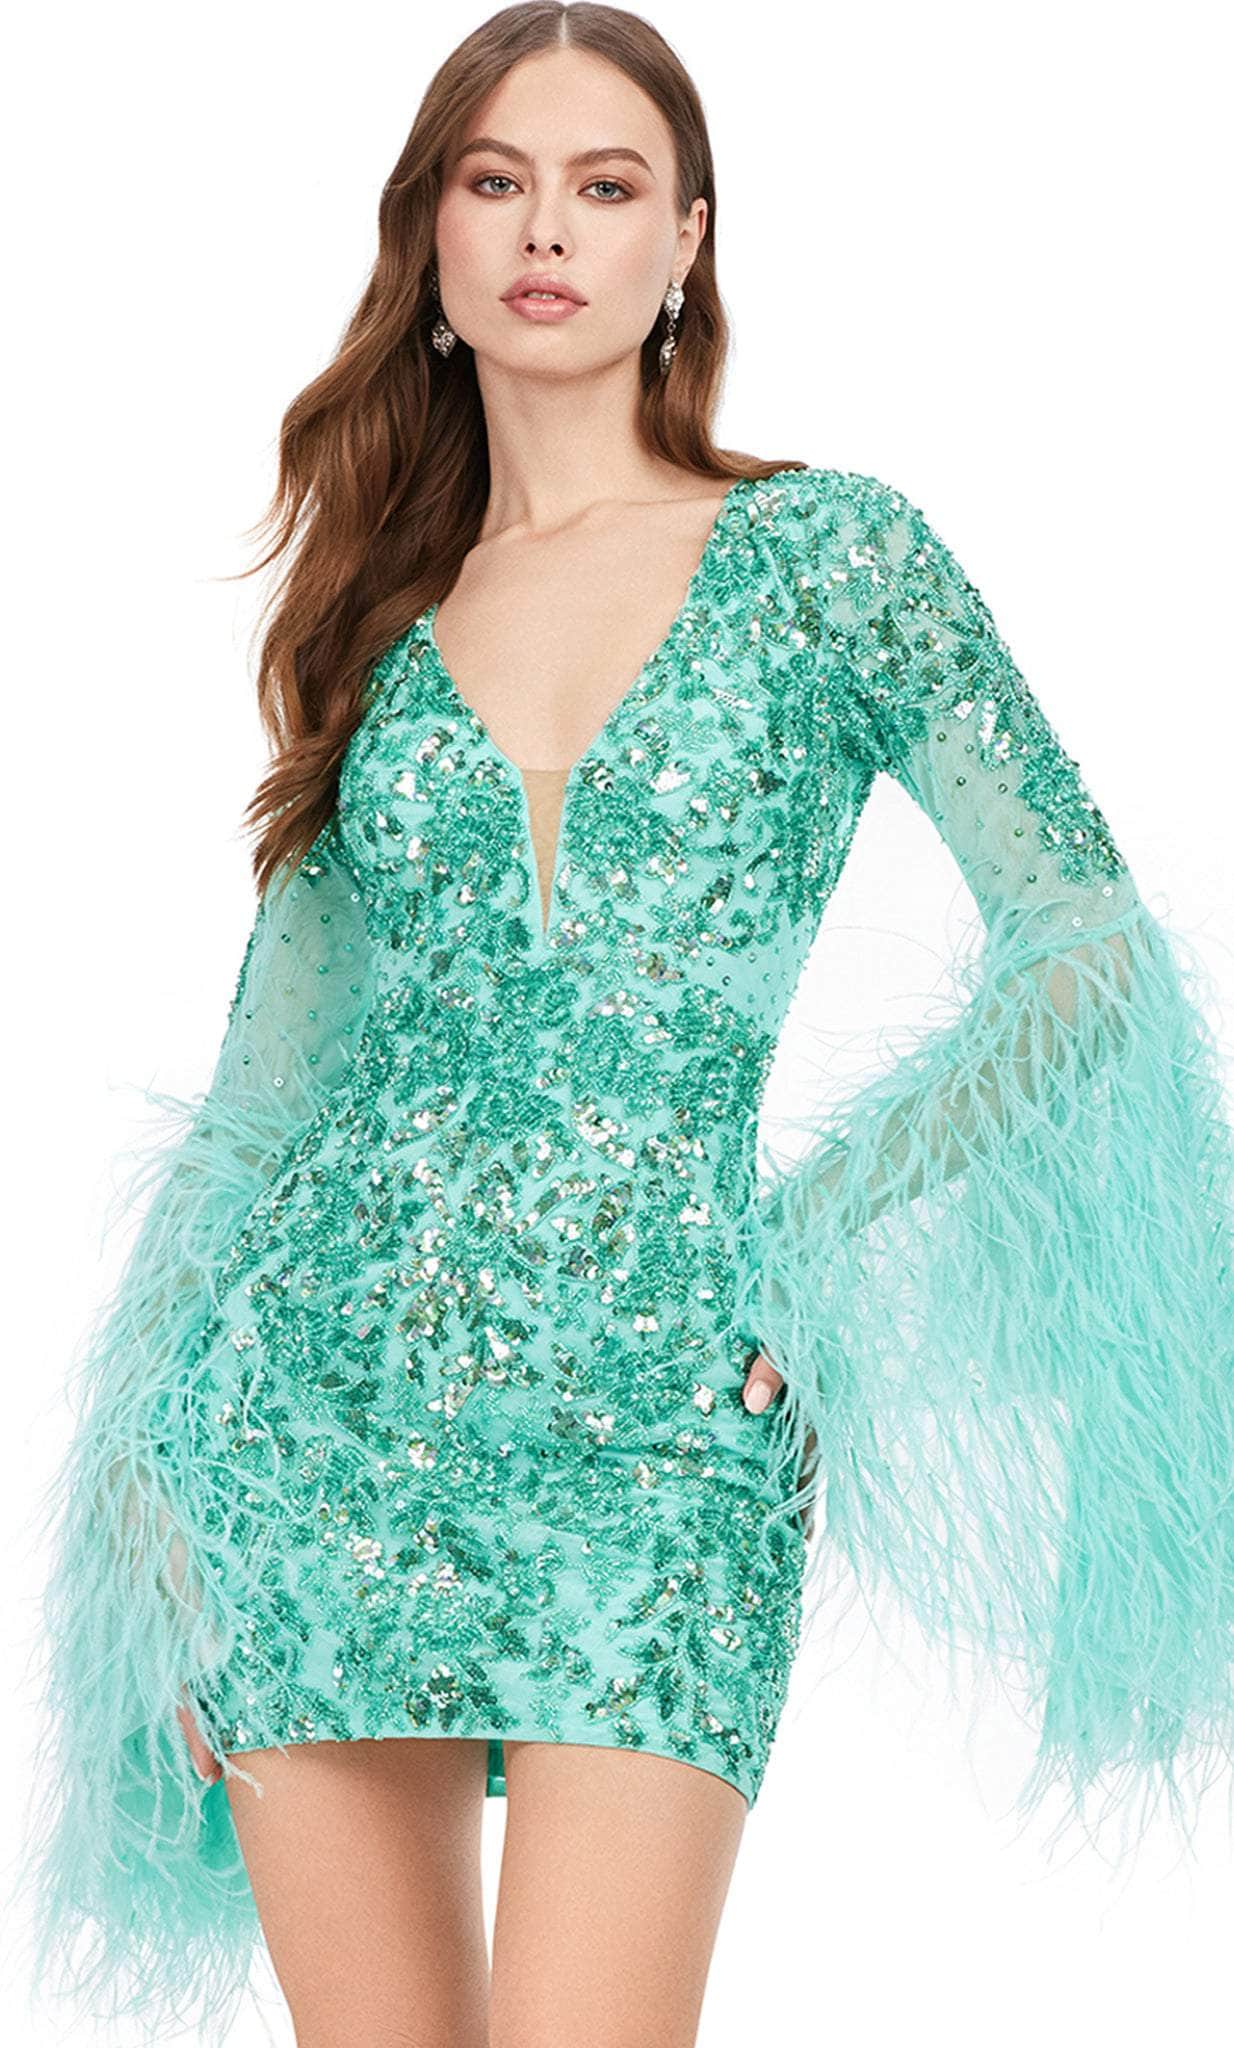 Ashley Lauren 4603 - Bell Feathered Sleeve Cocktail Dress
